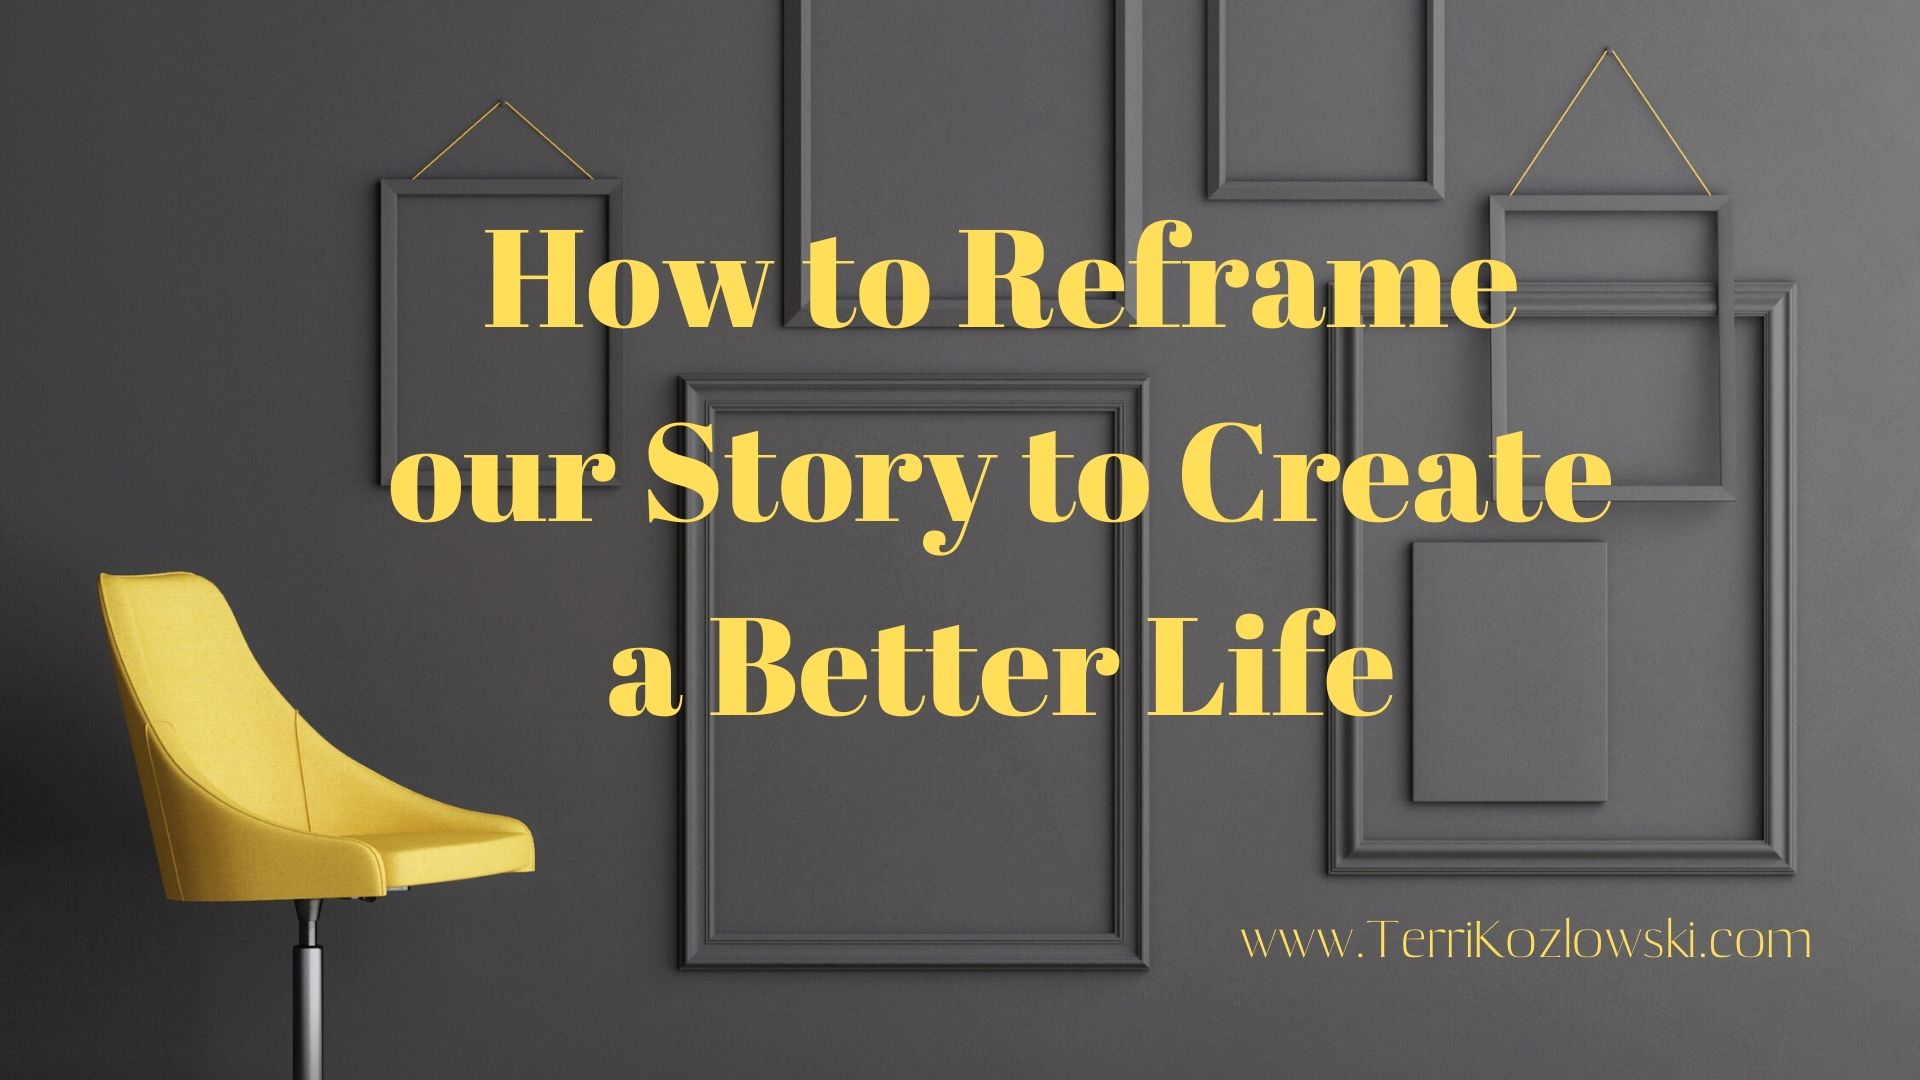 Reframing is a tool